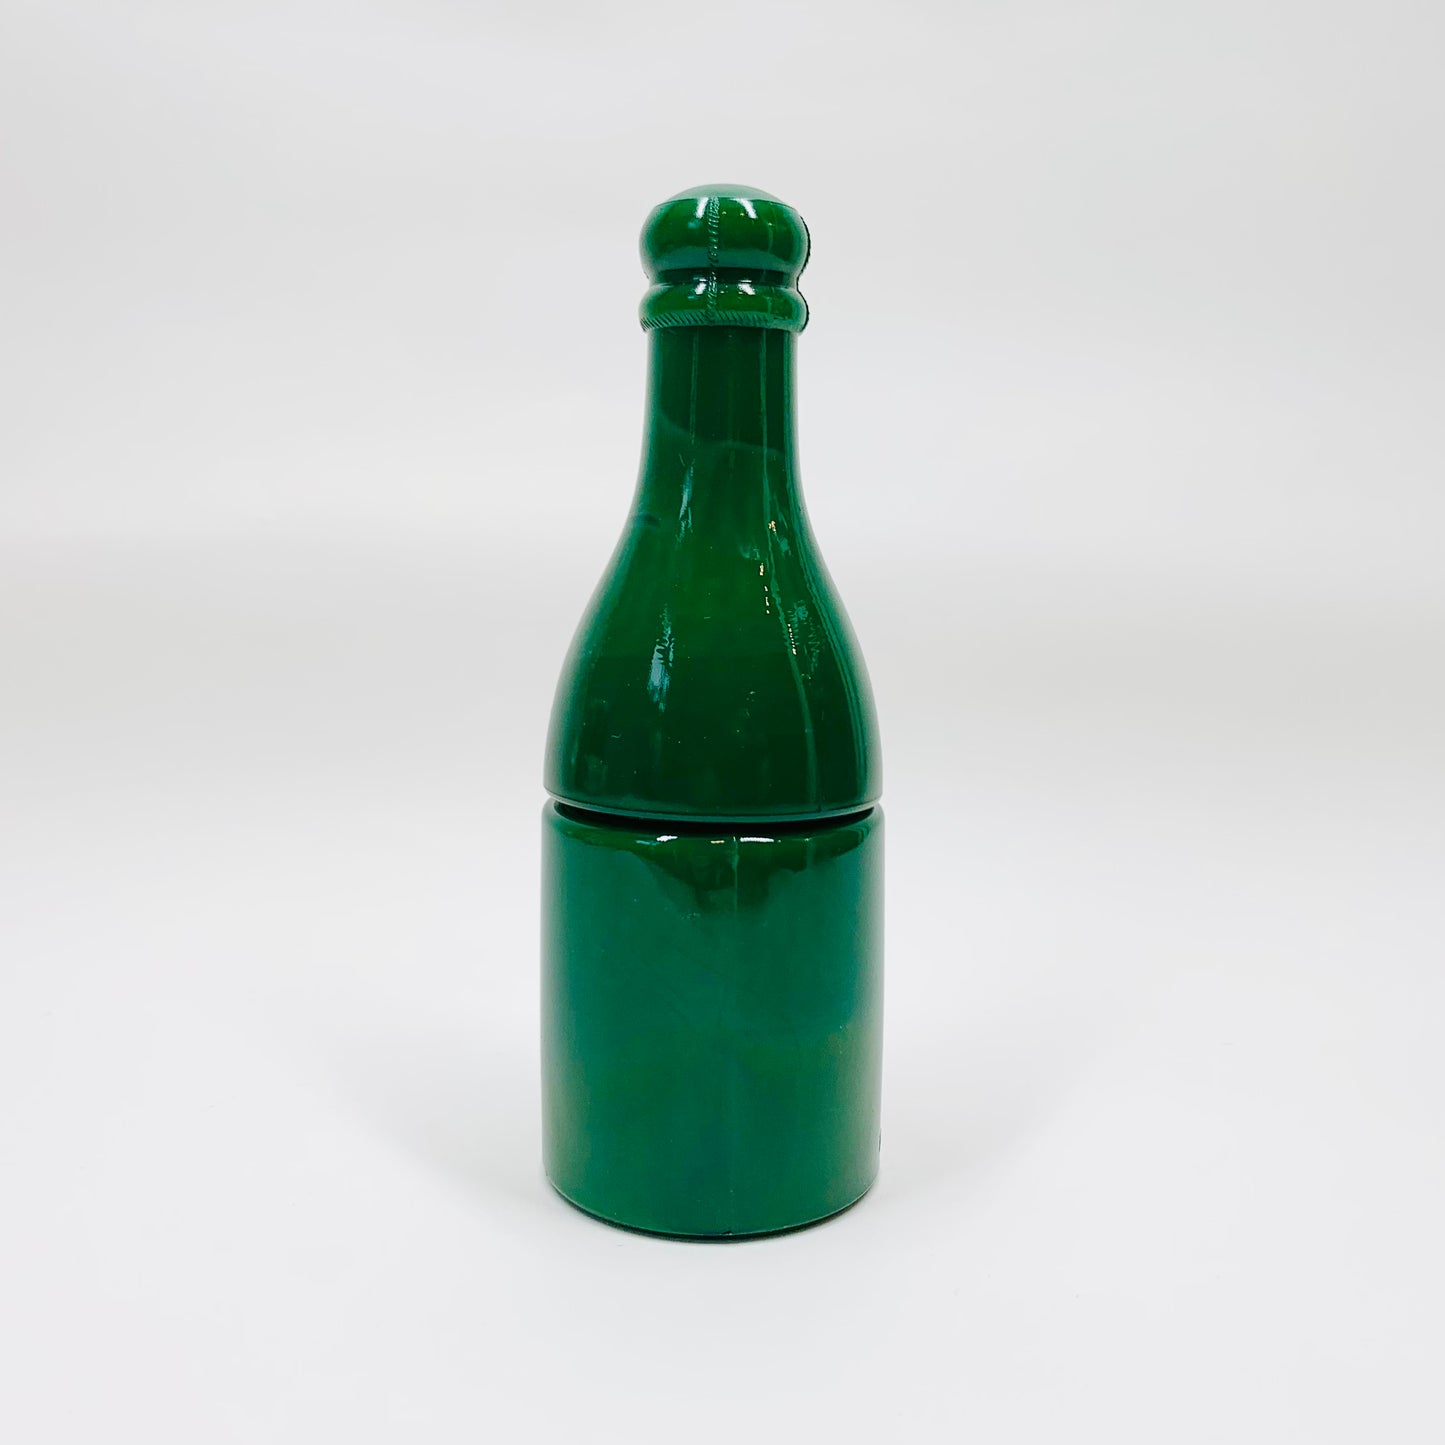 Extremely rare antique green opaline glass medicine bottle